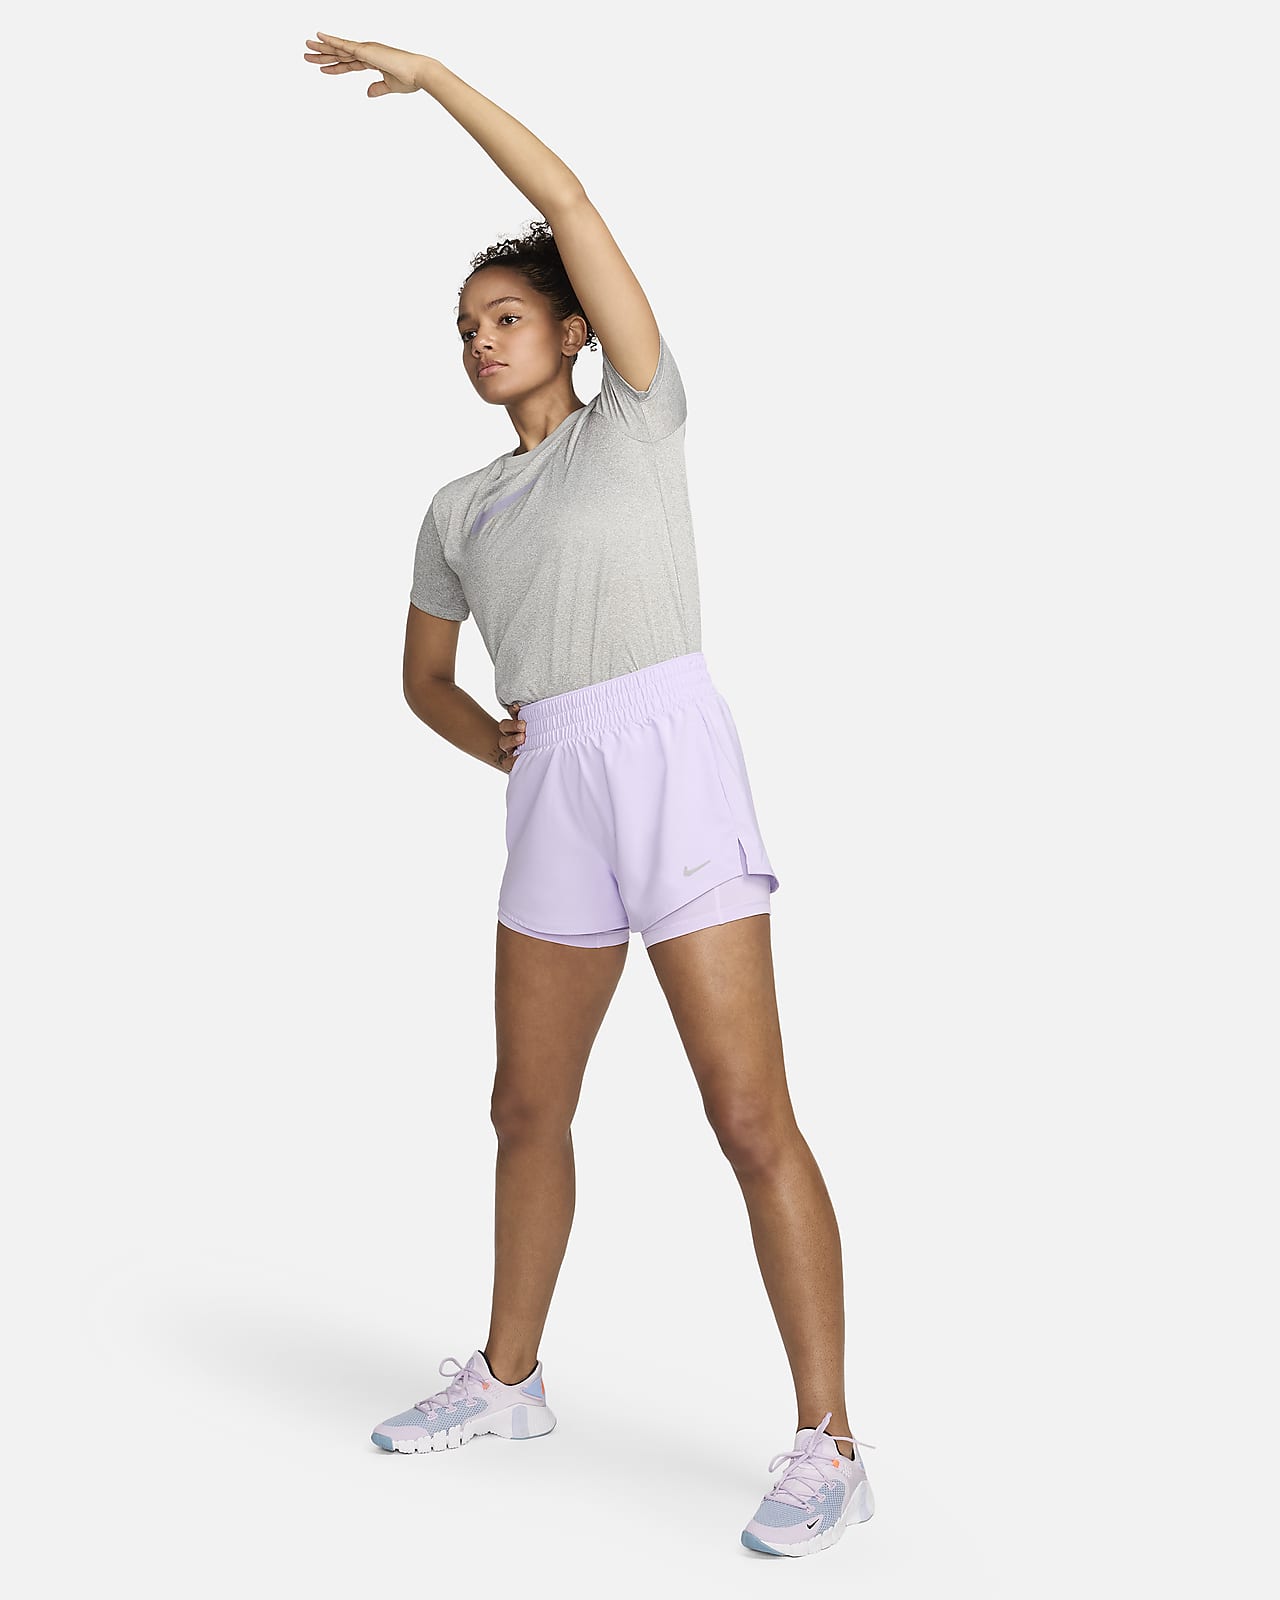 Women's Nike One Dri-FIT High-Waisted 2-in-1 Shorts